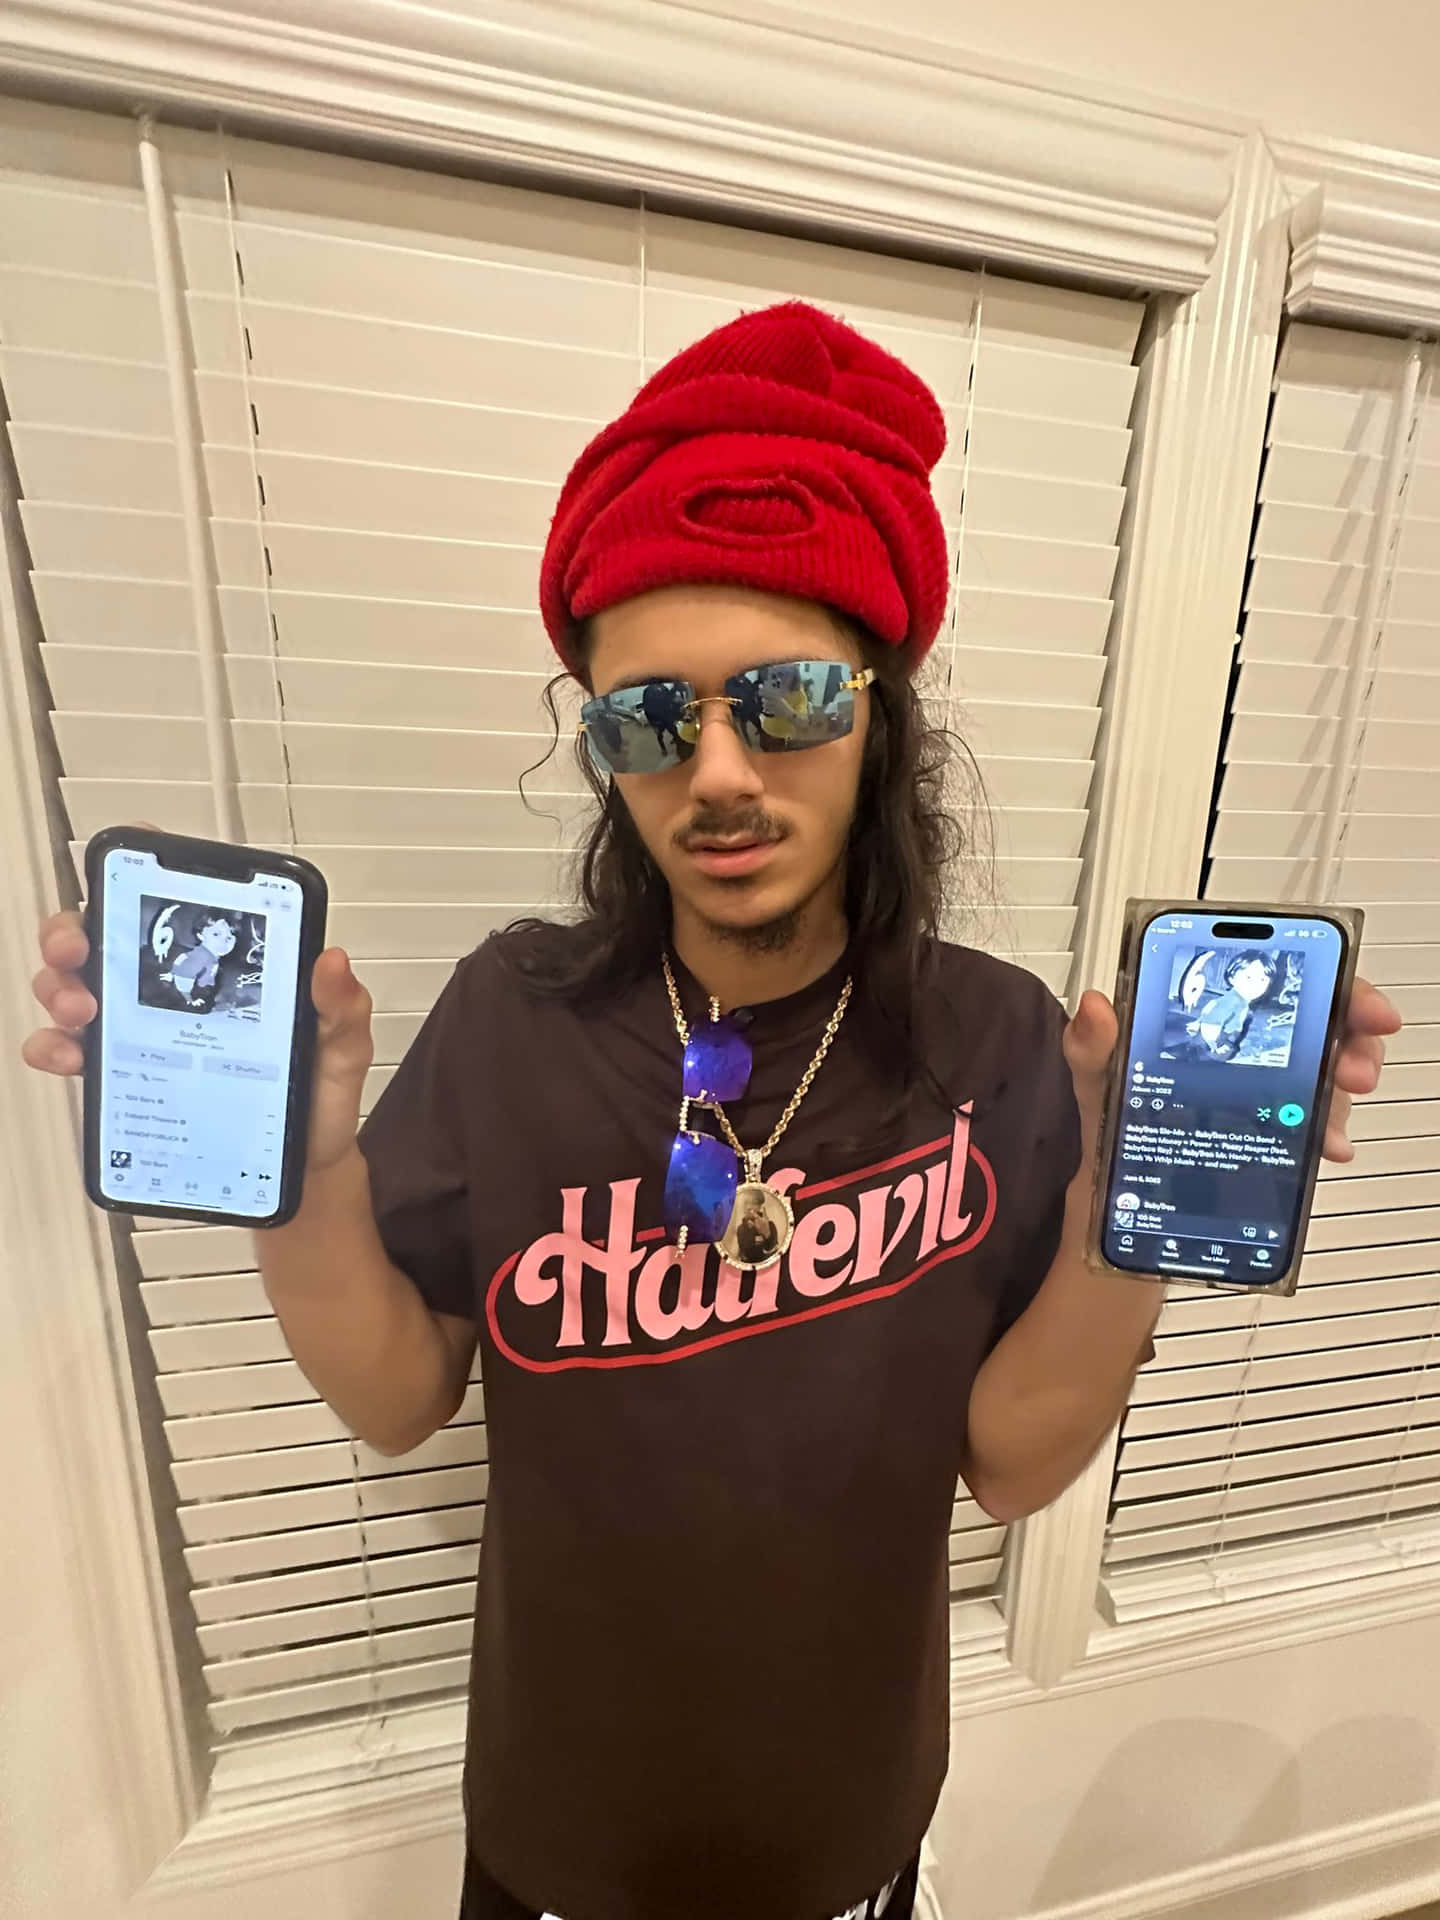 Manwith Red Beanieand Sunglasses Holding Two Phones Wallpaper